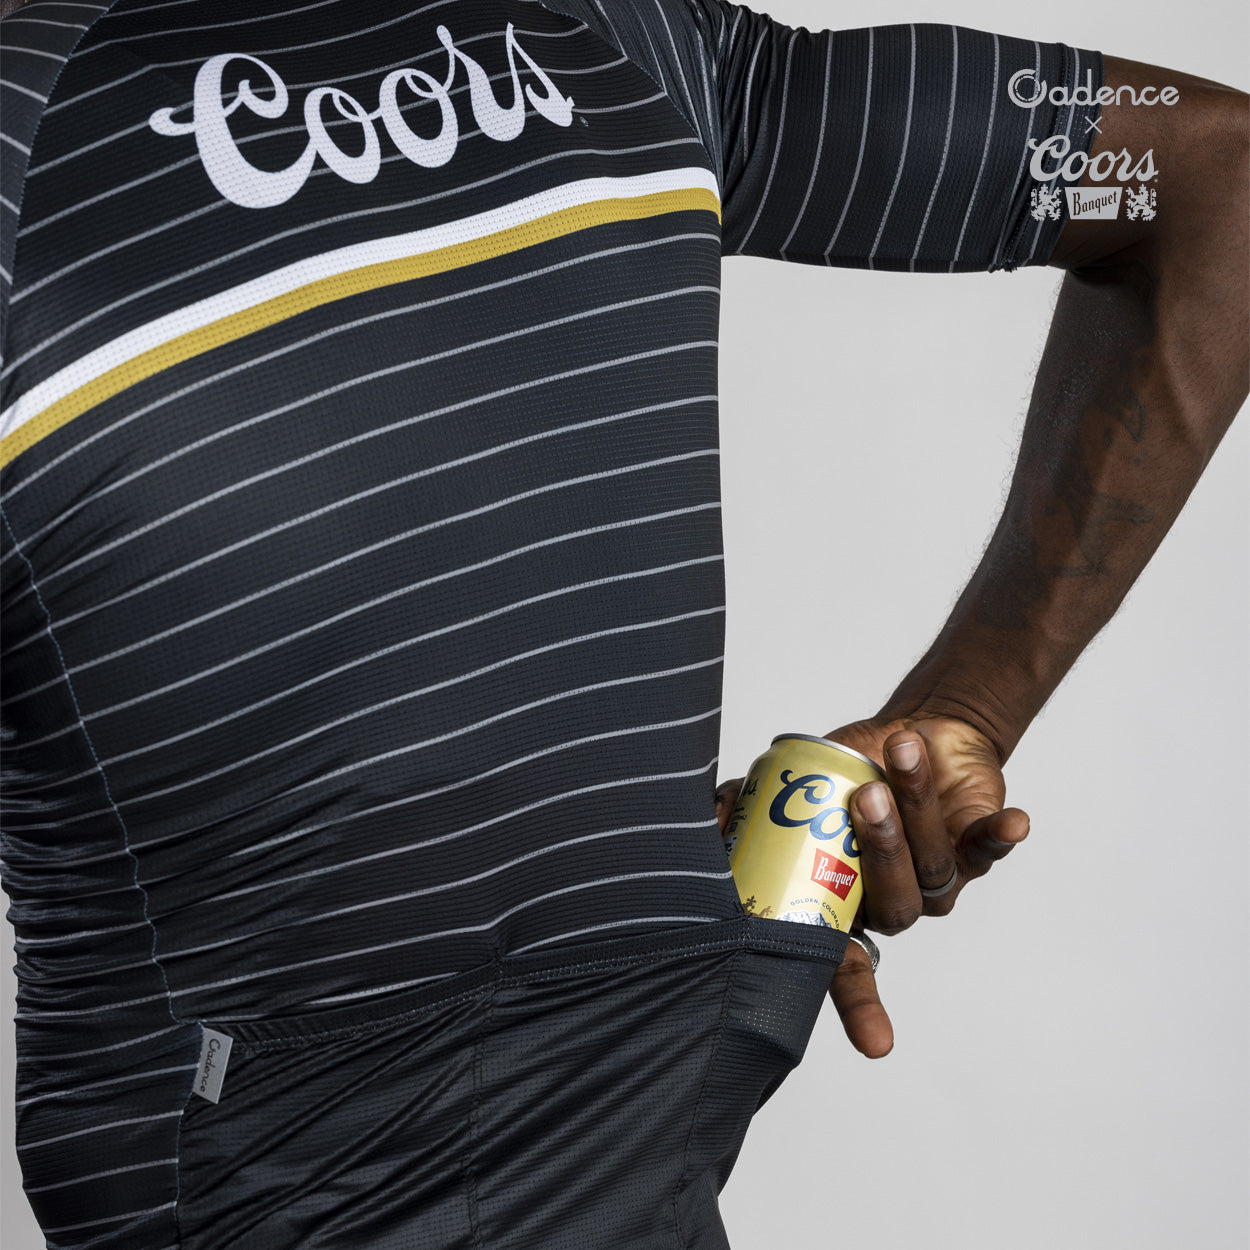 Coors Barley S/S Jersey [Black]